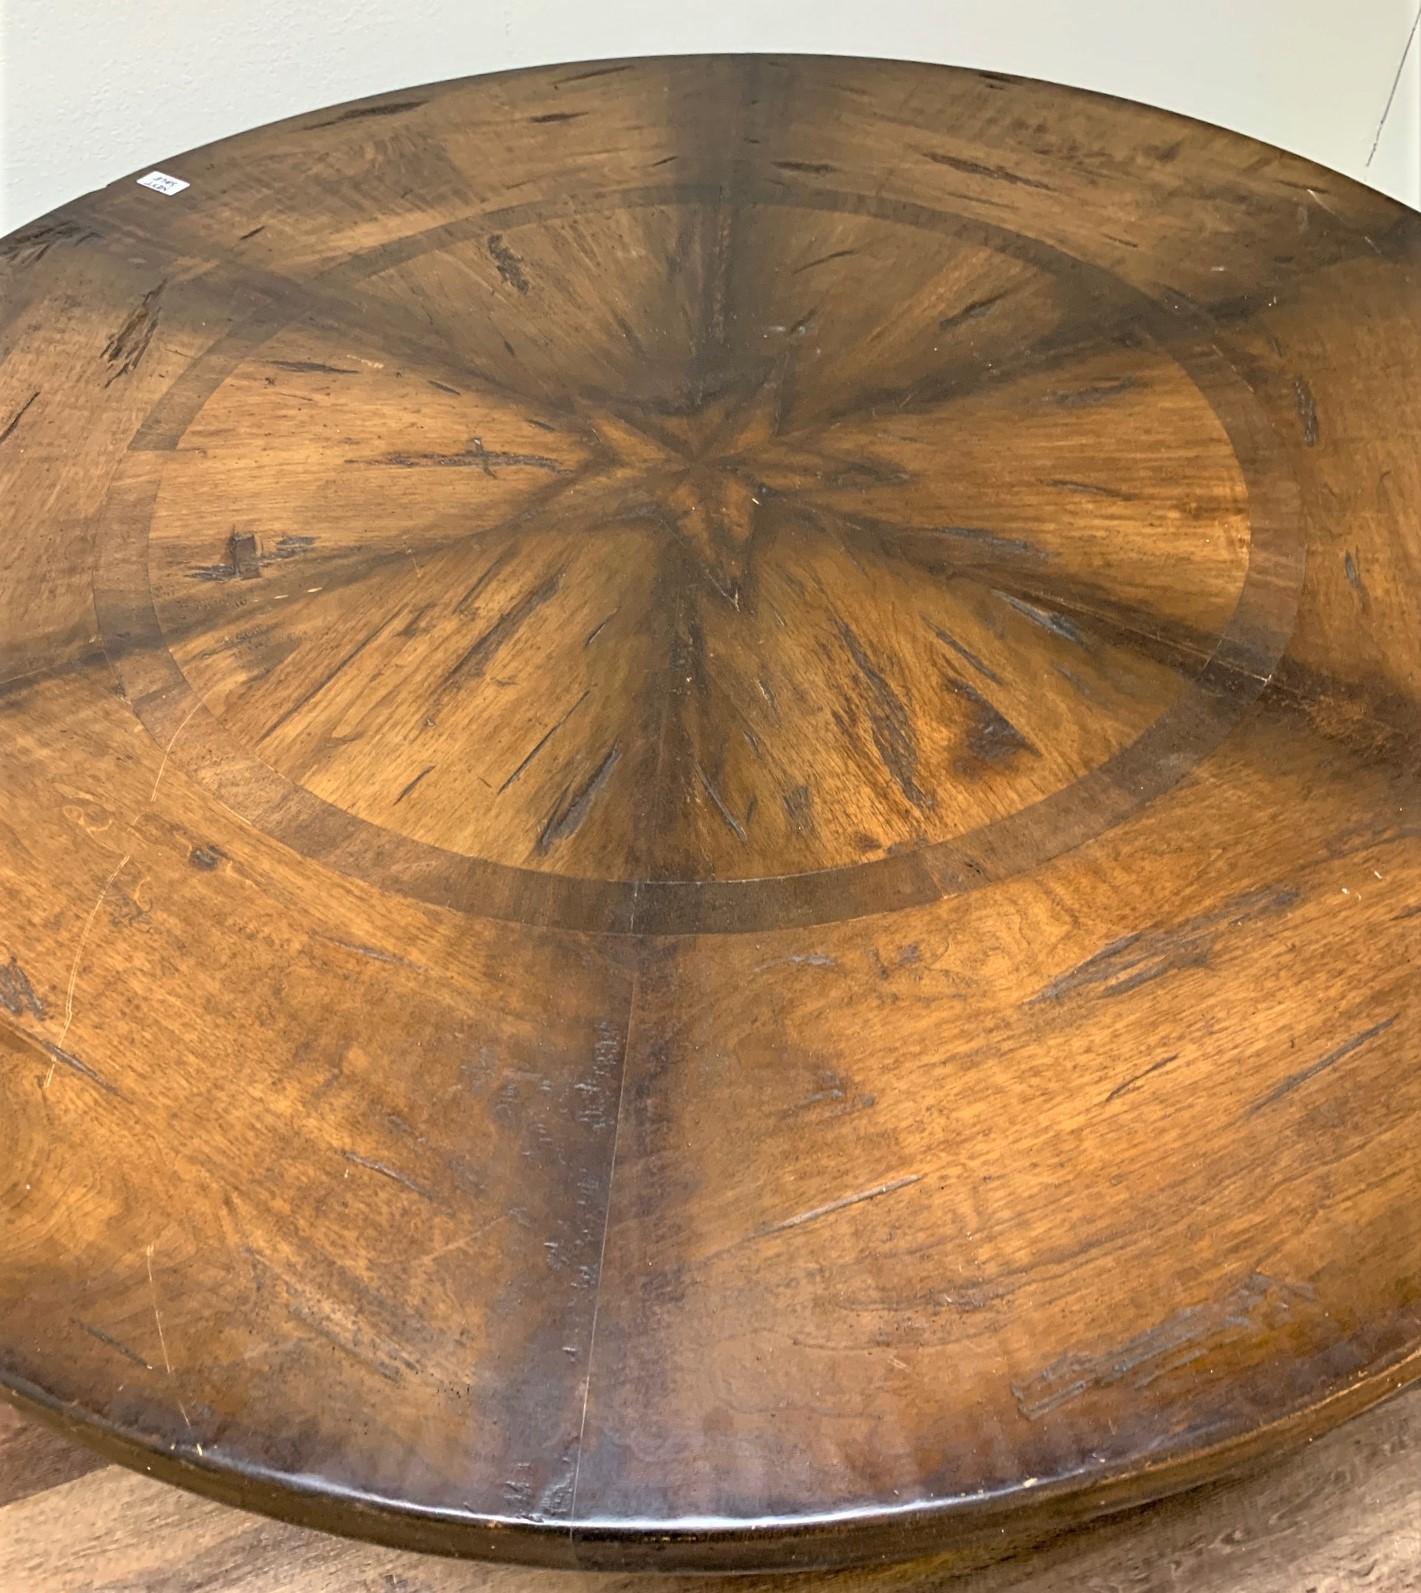 Excellent quality custom made French style walnut and alderwood center-of-the-room or breakfast table featuring a decorated circular top raised on a turned baluster and stepped plinth. Finely crafted possessing rich color and a warm patina.